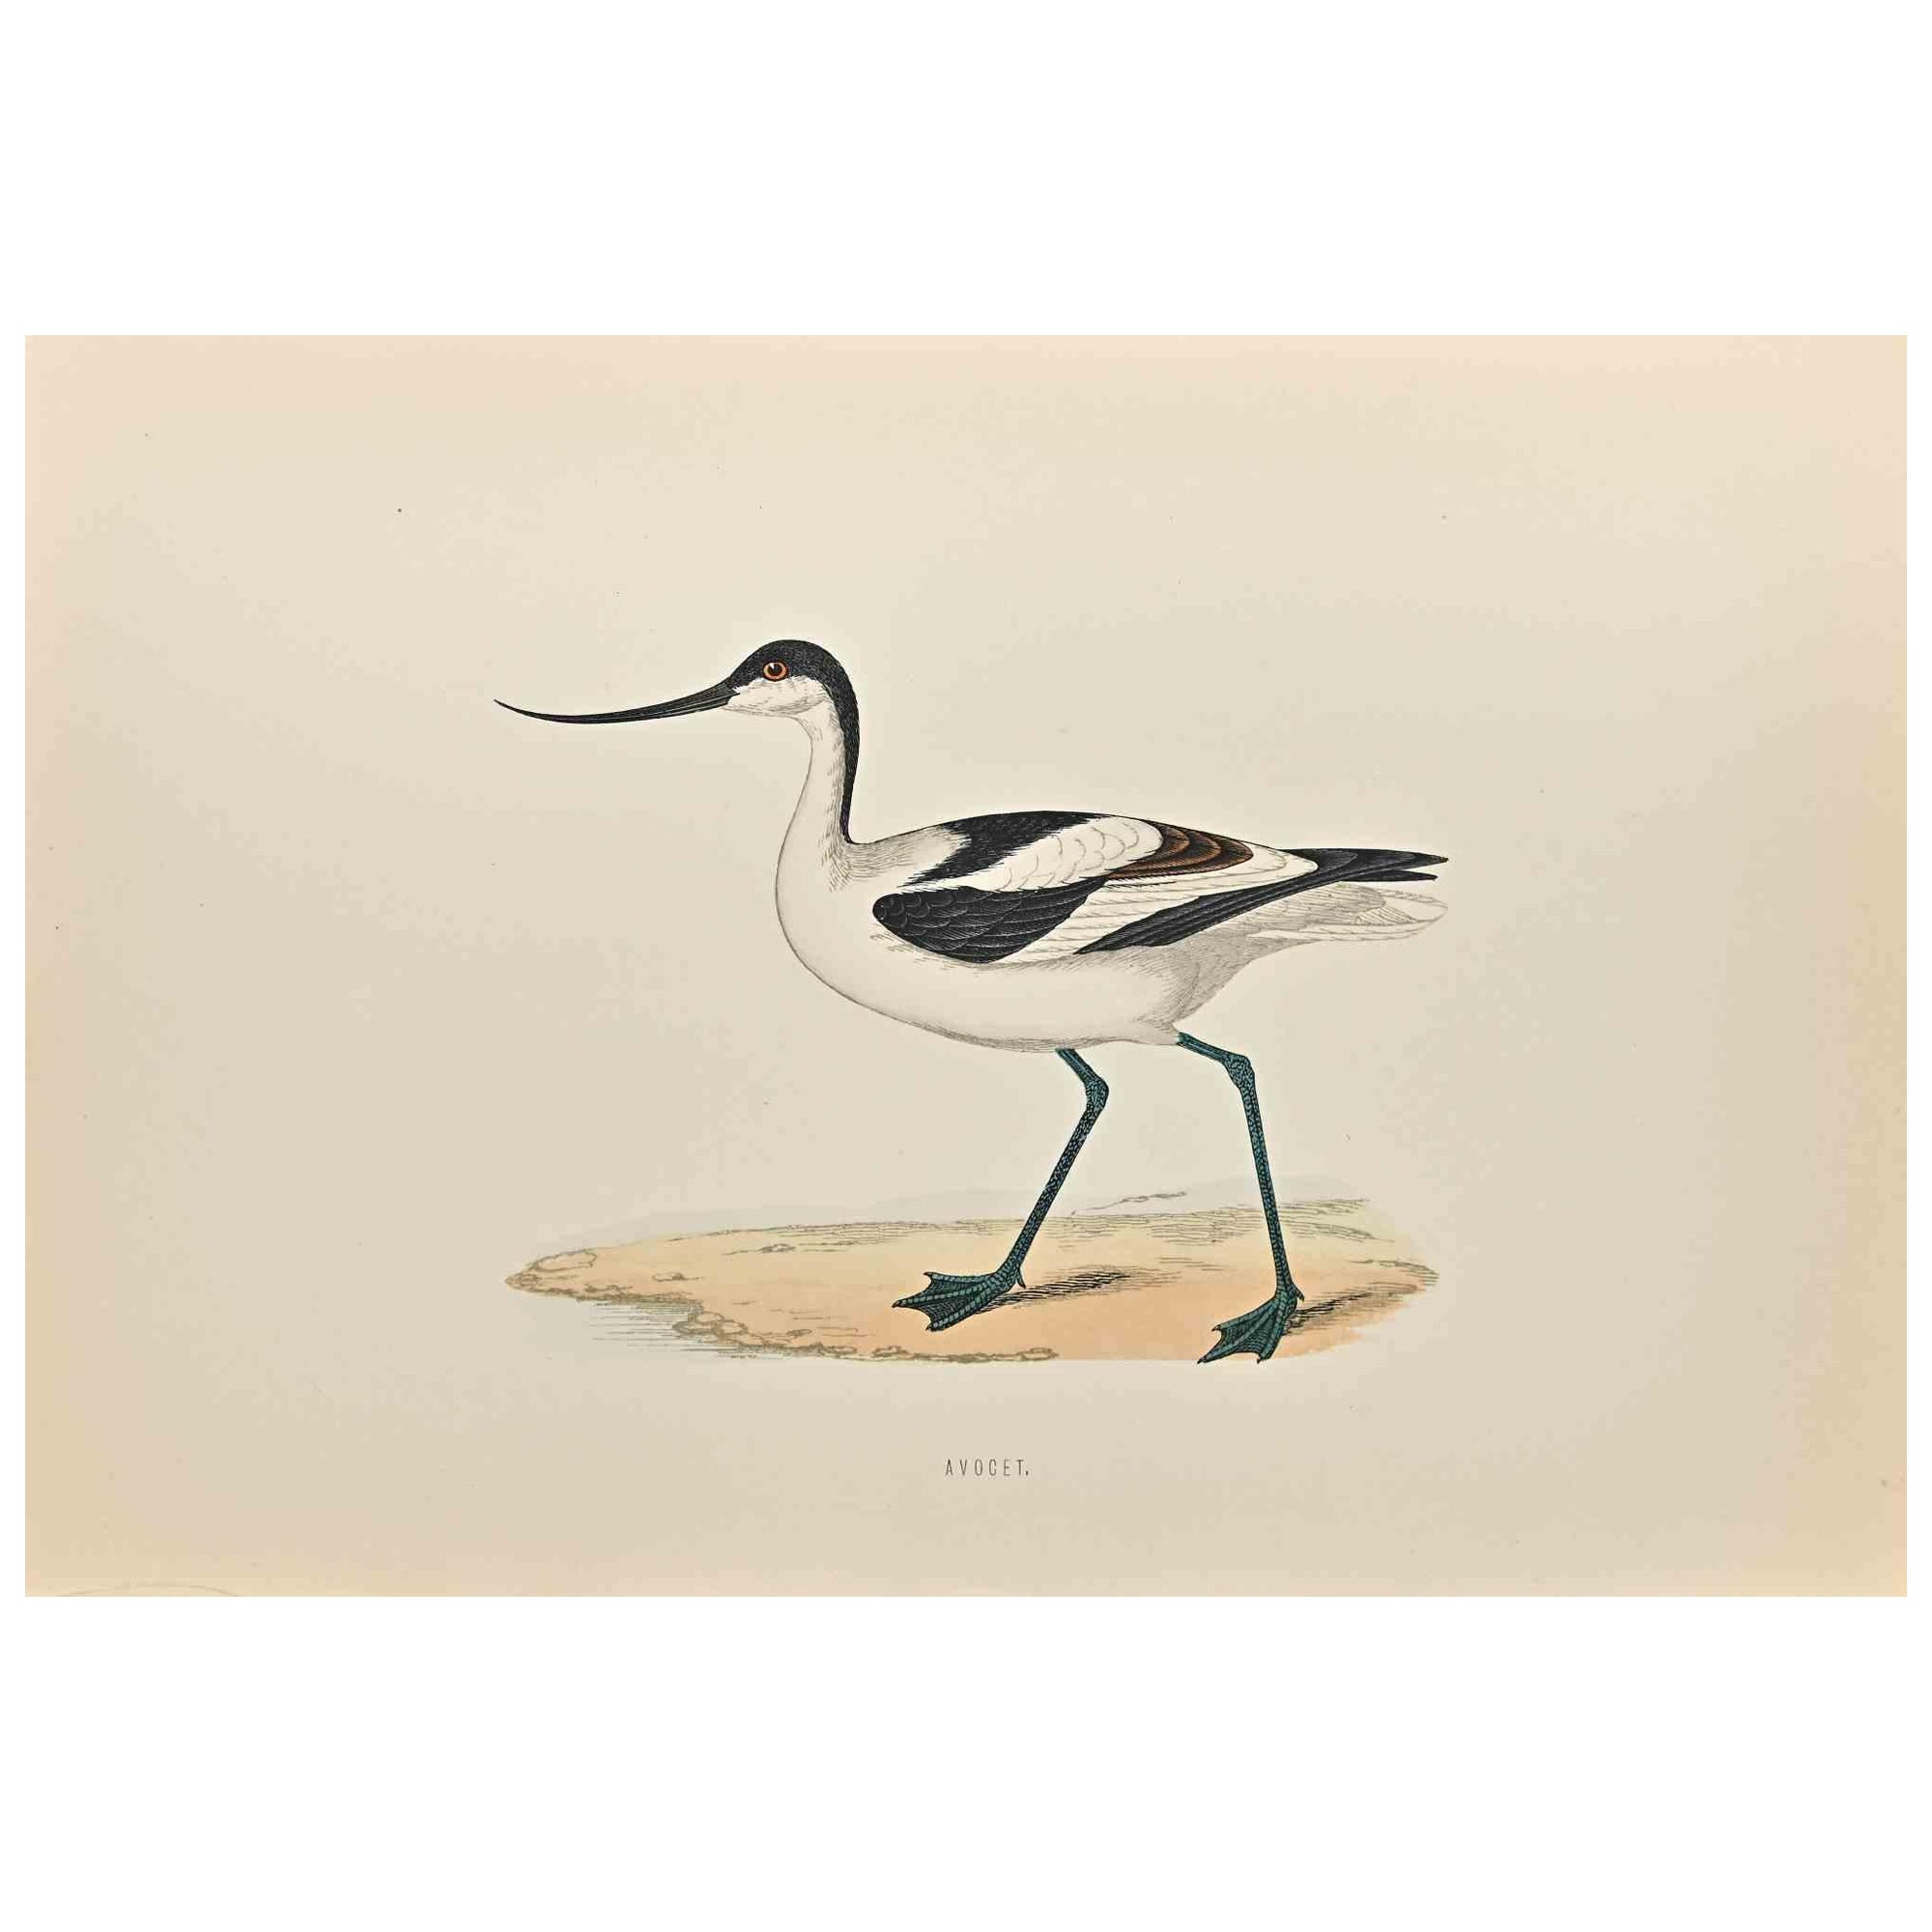 Avocet is a modern artwork realized in 1870 by the British artist Alexander Francis Lydon (1836-1917).

Woodcut print on ivory-colored paper.

Hand-colored, published by London, Bell & Sons, 1870.  

The name of the bird is printed on the plate.